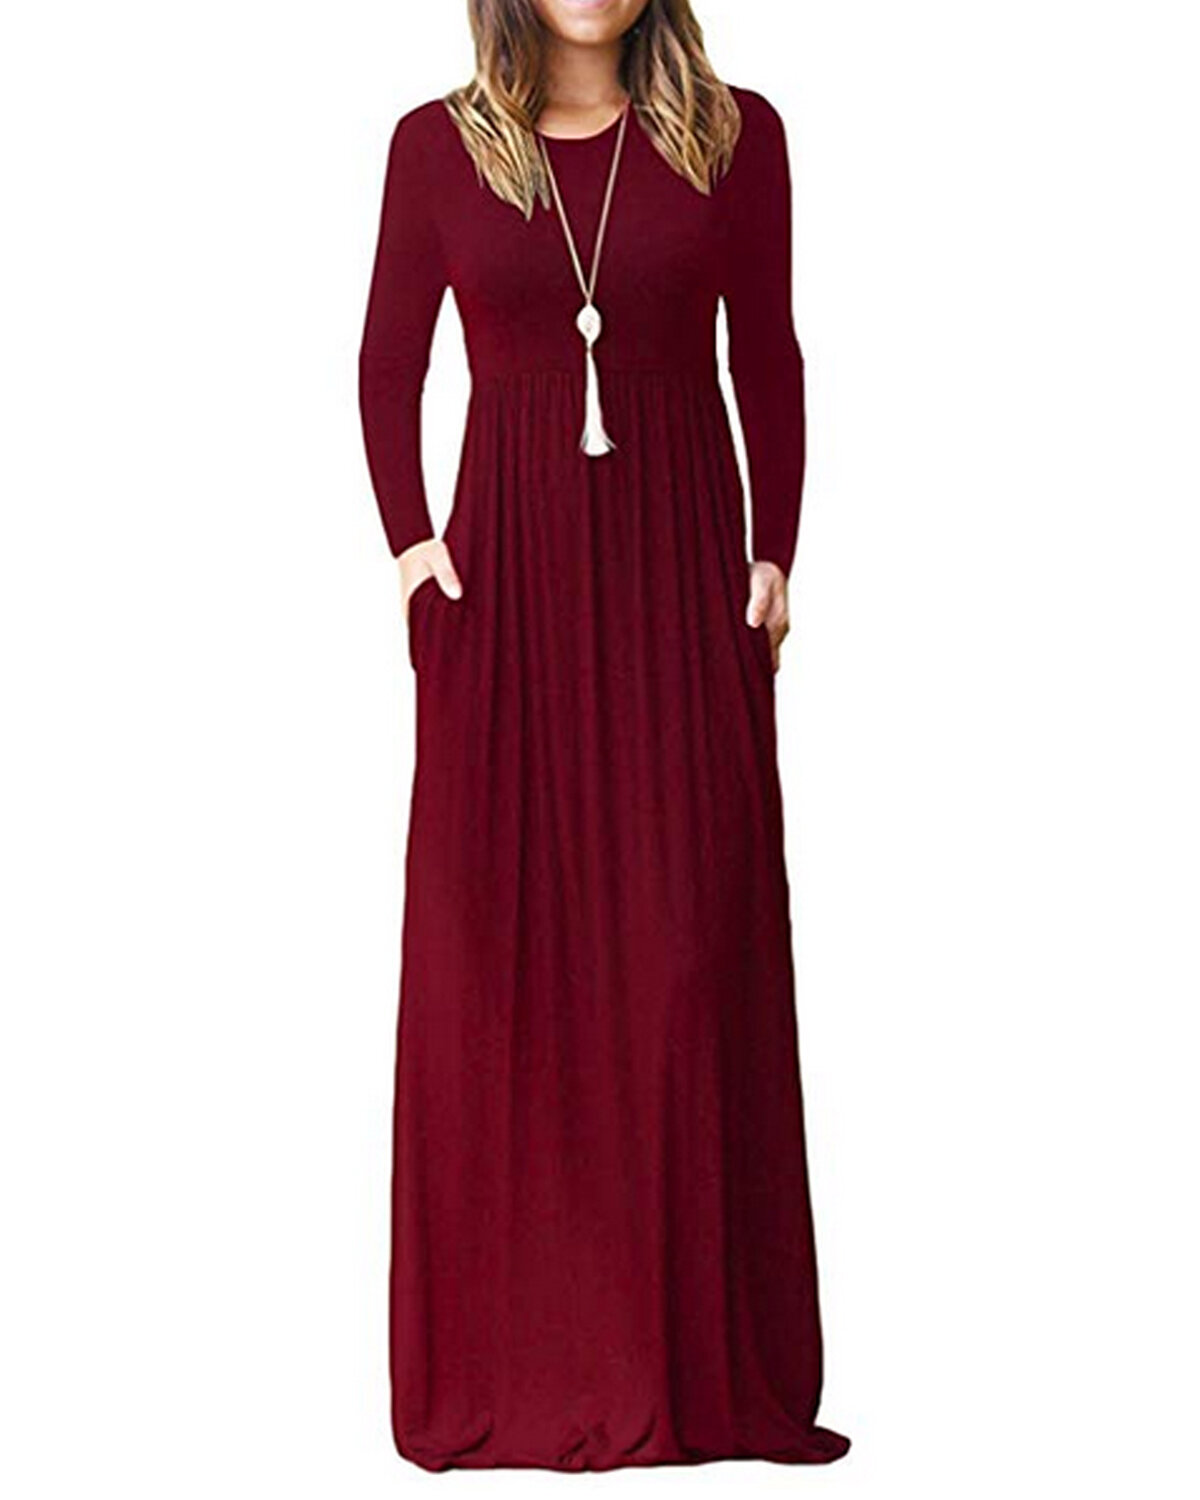 Women Long Sleeve Loose Solid Casual Long Maxi Dress with Pockets